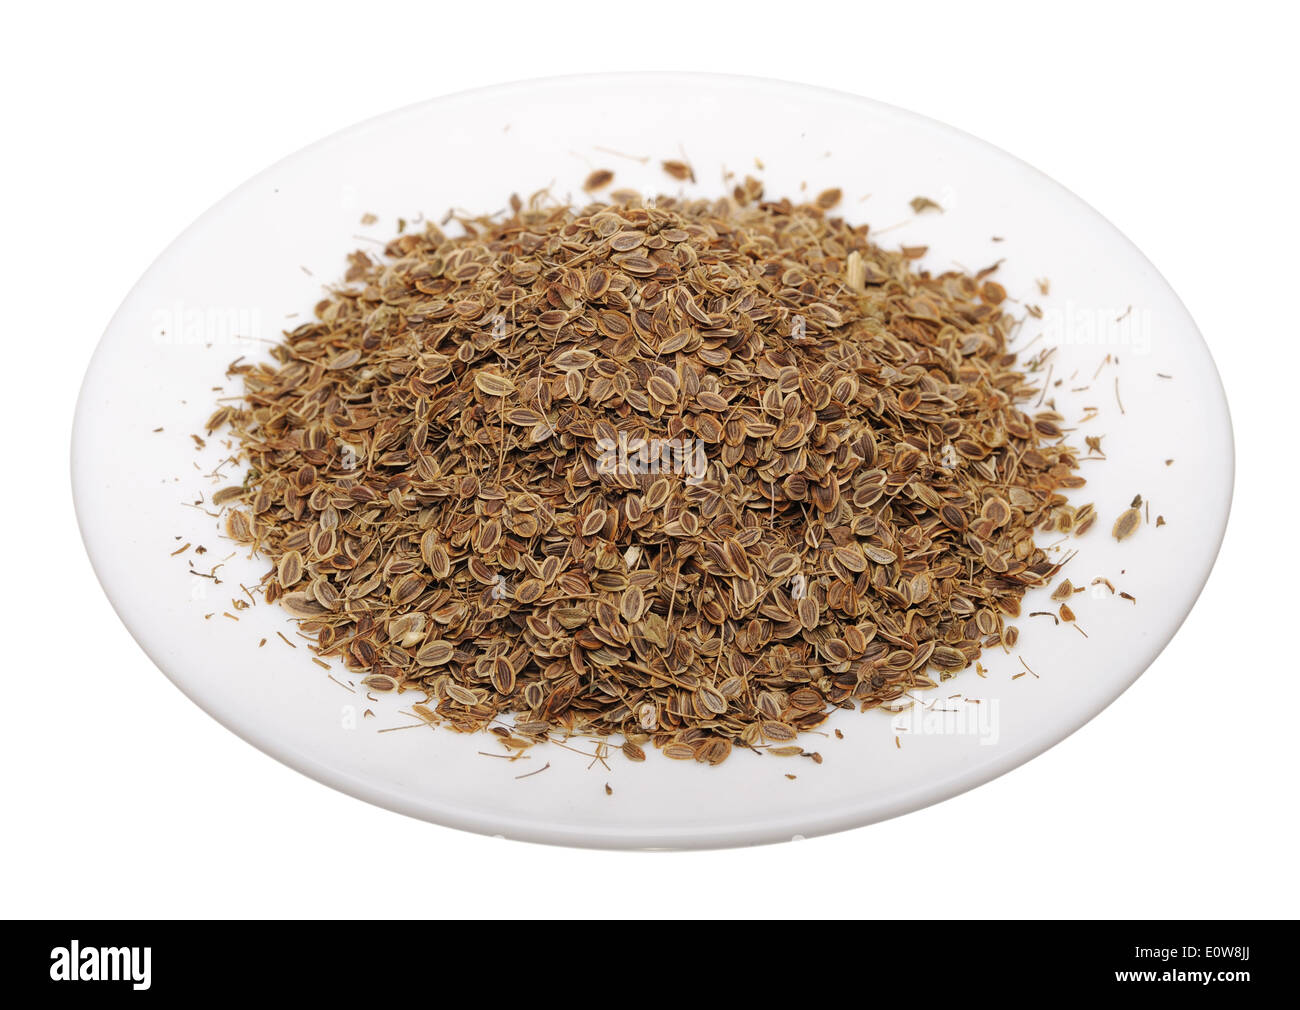 Fennel seeds on a white background, isolated Stock Photo